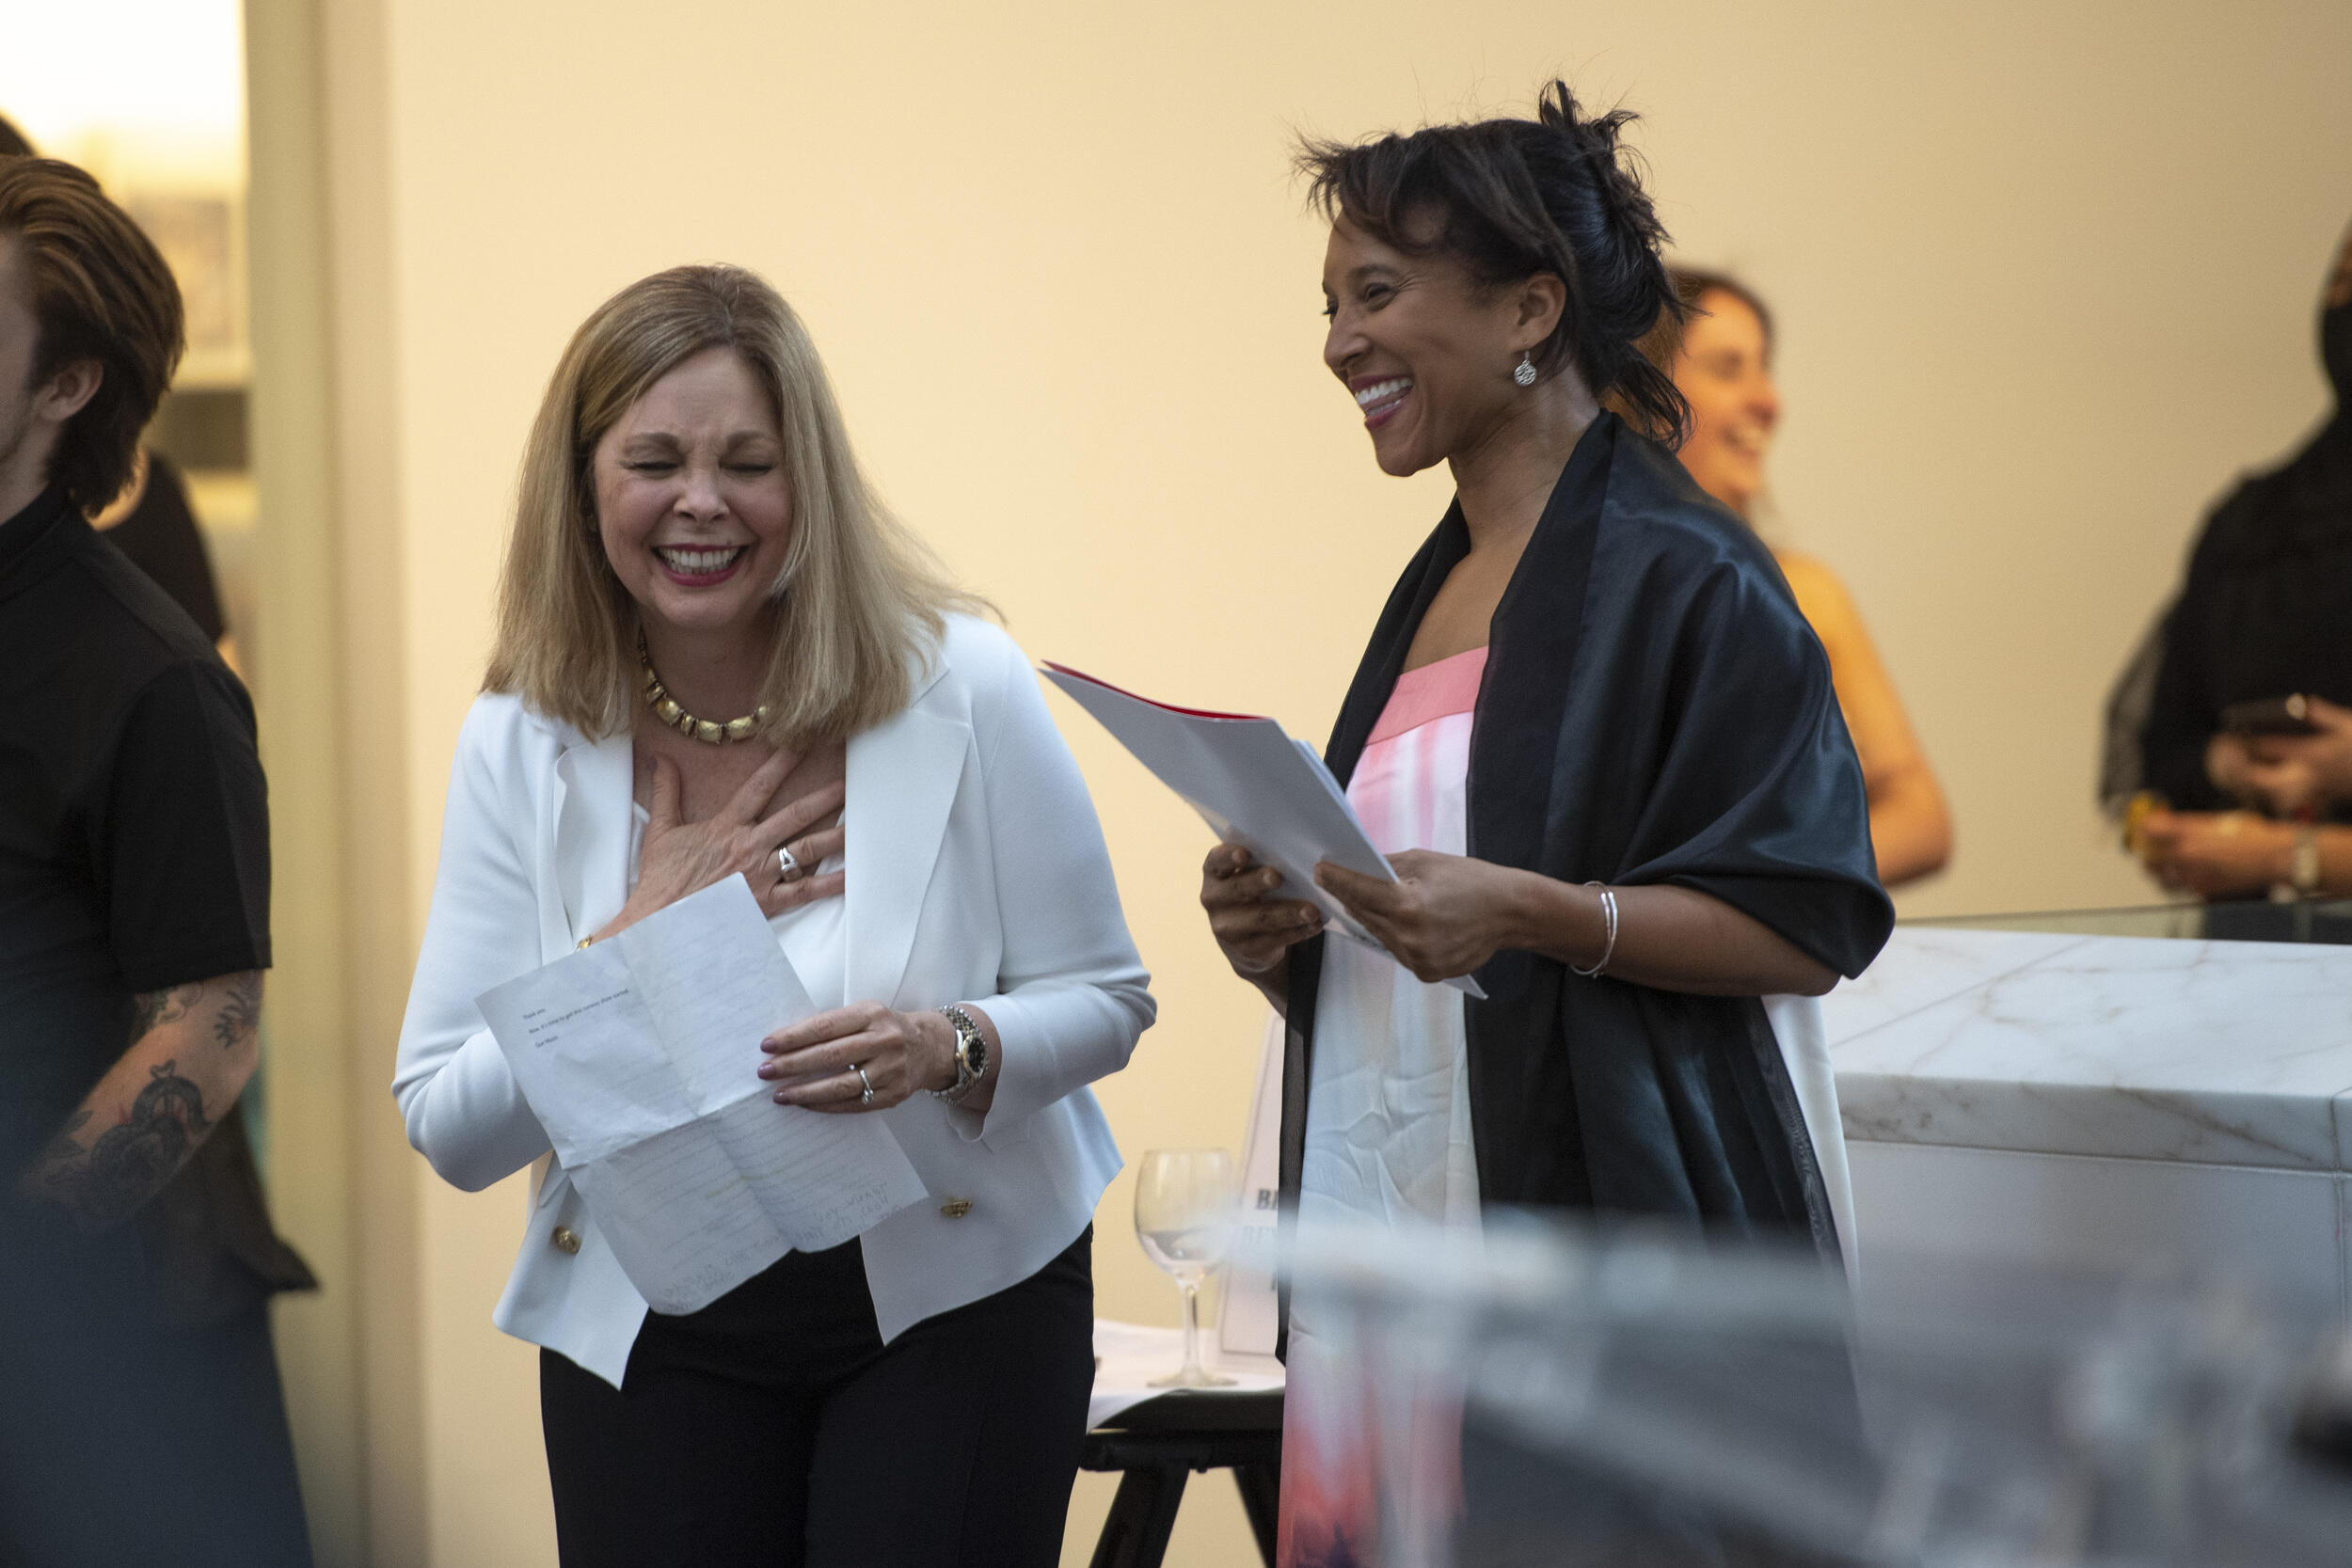 Left to right: Deidra Arrington and Carmenita Higginbotham standing next to each other and holding papers while laughing 